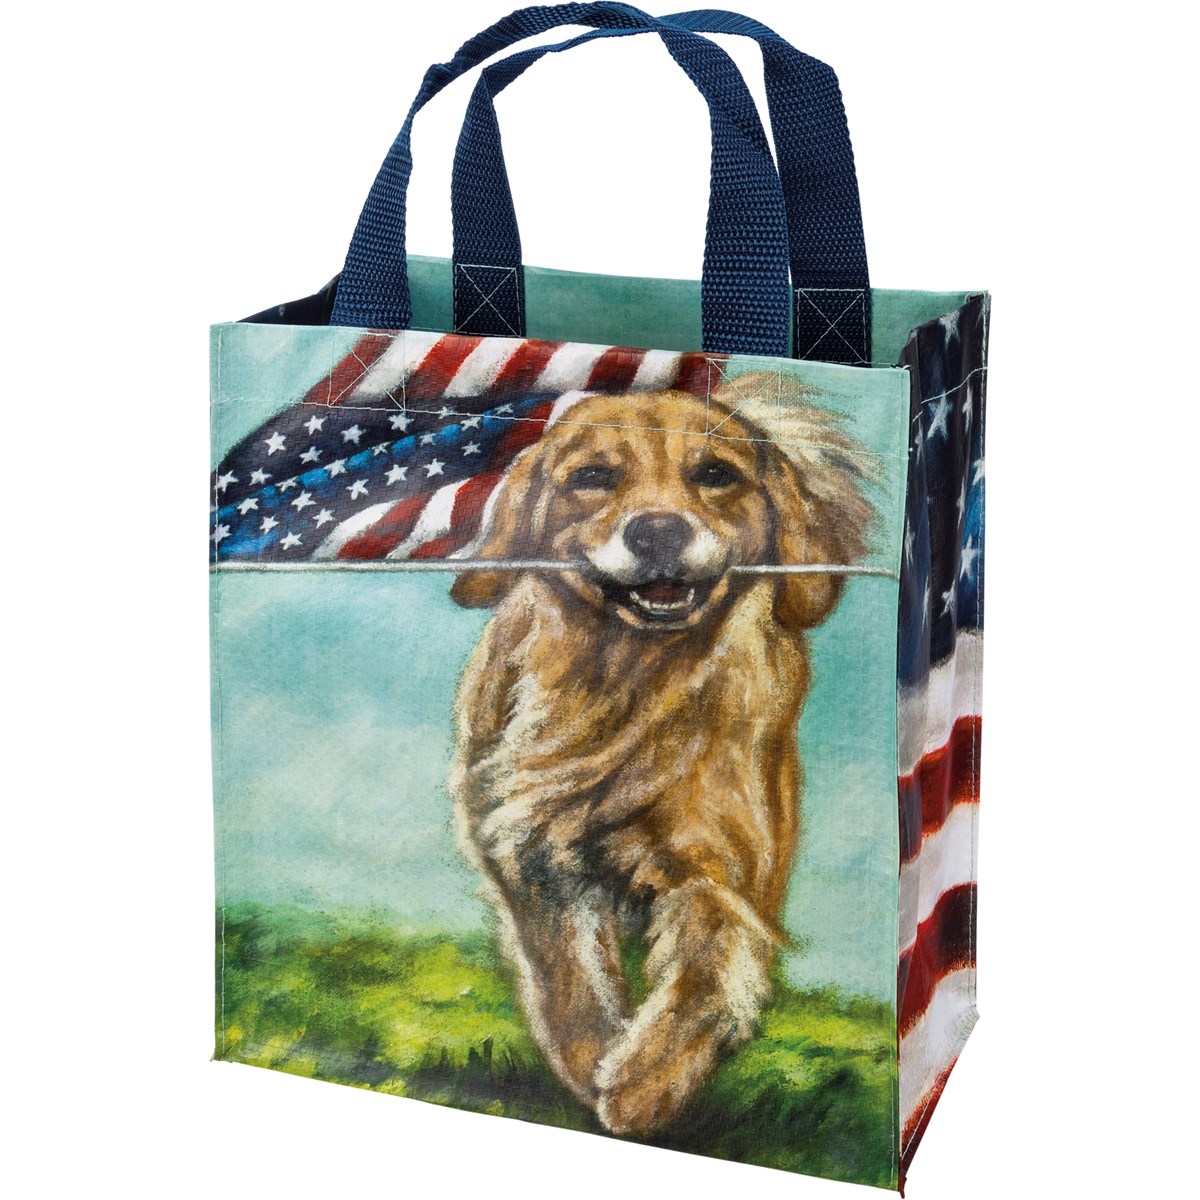 Daily Tote - Dogs And Flags - 8.75" x 10.25" x 4.75" - Post-Consumer Material, Nylon